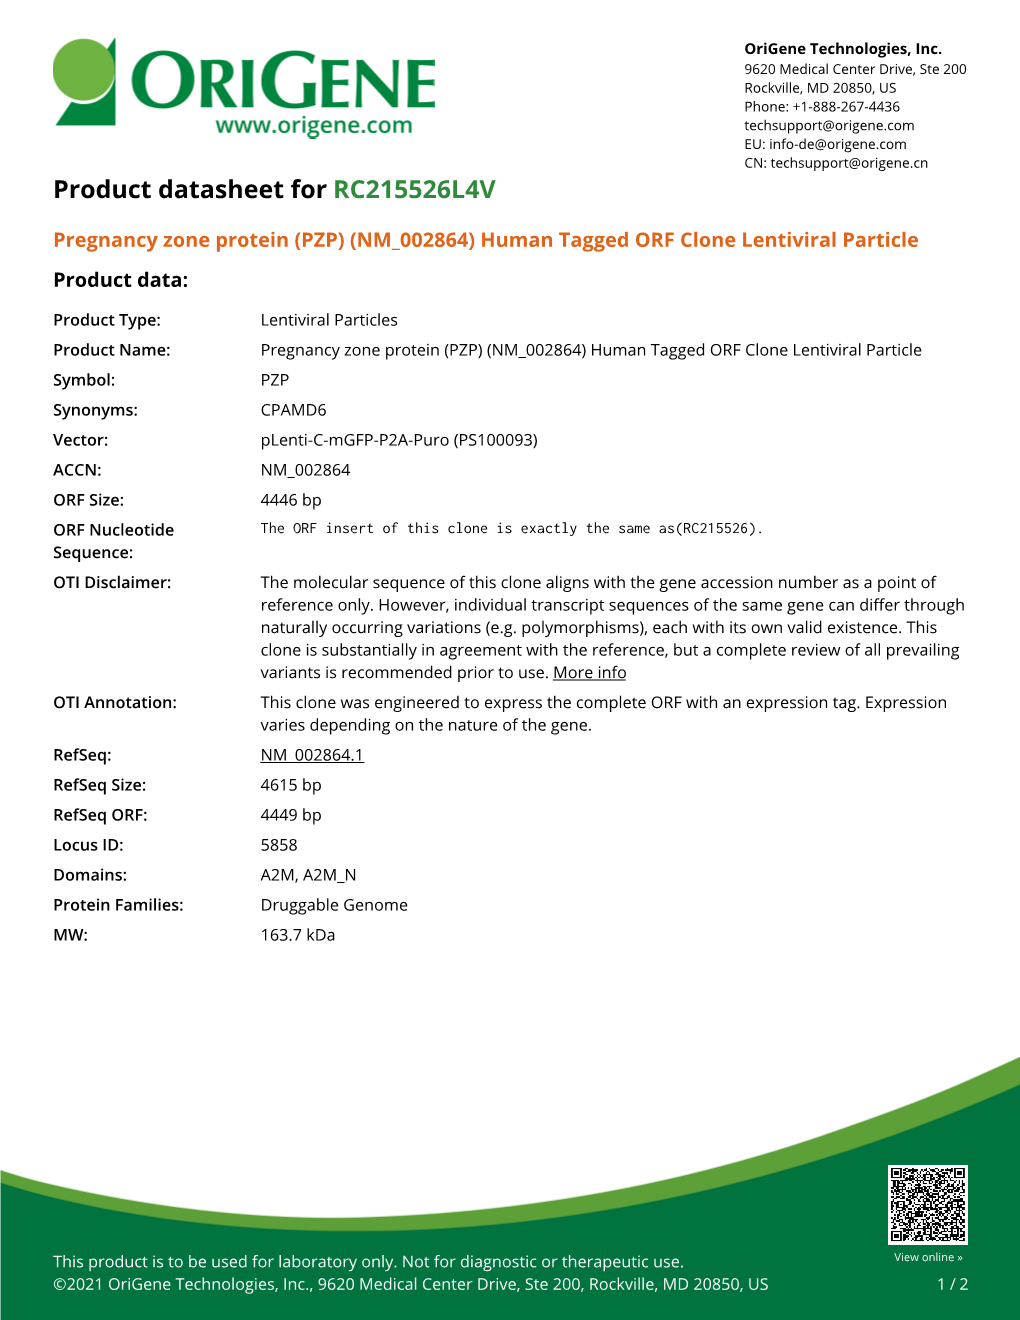 Pregnancy Zone Protein (PZP) (NM 002864) Human Tagged ORF Clone Lentiviral Particle Product Data